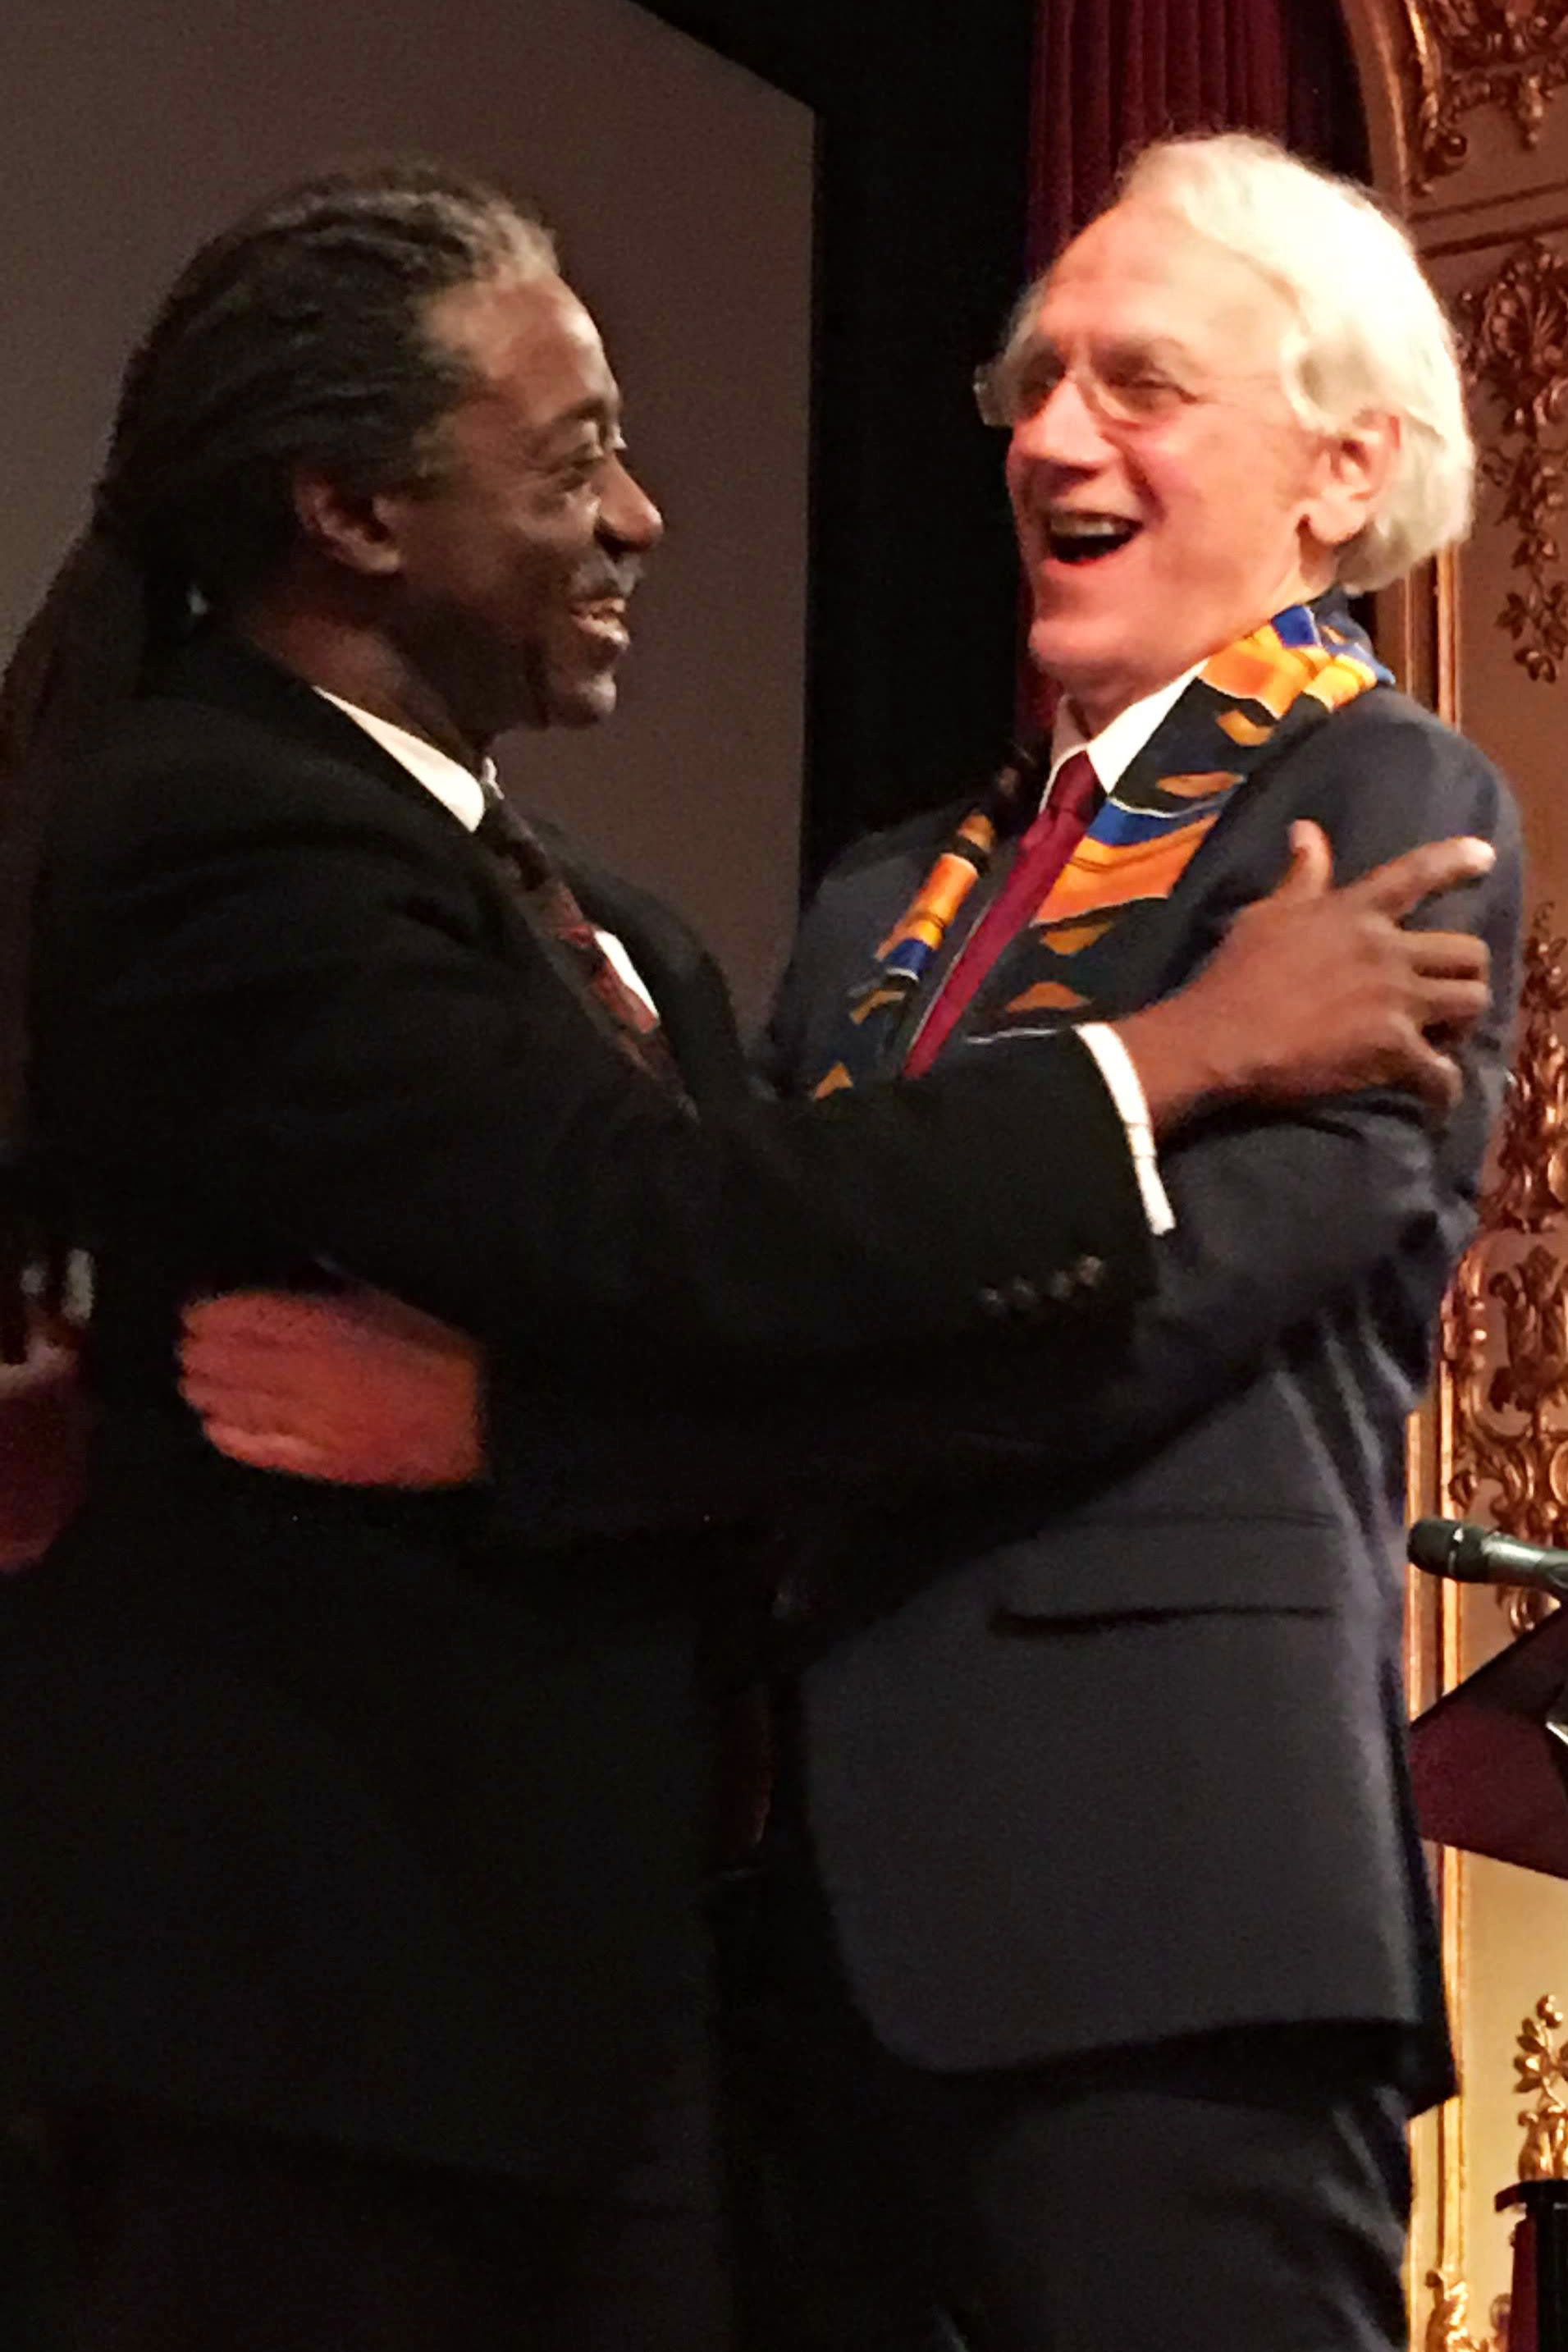 Herbert Winful and Gérard Mourou hug at at party for the 2018 Nobel Ceremony